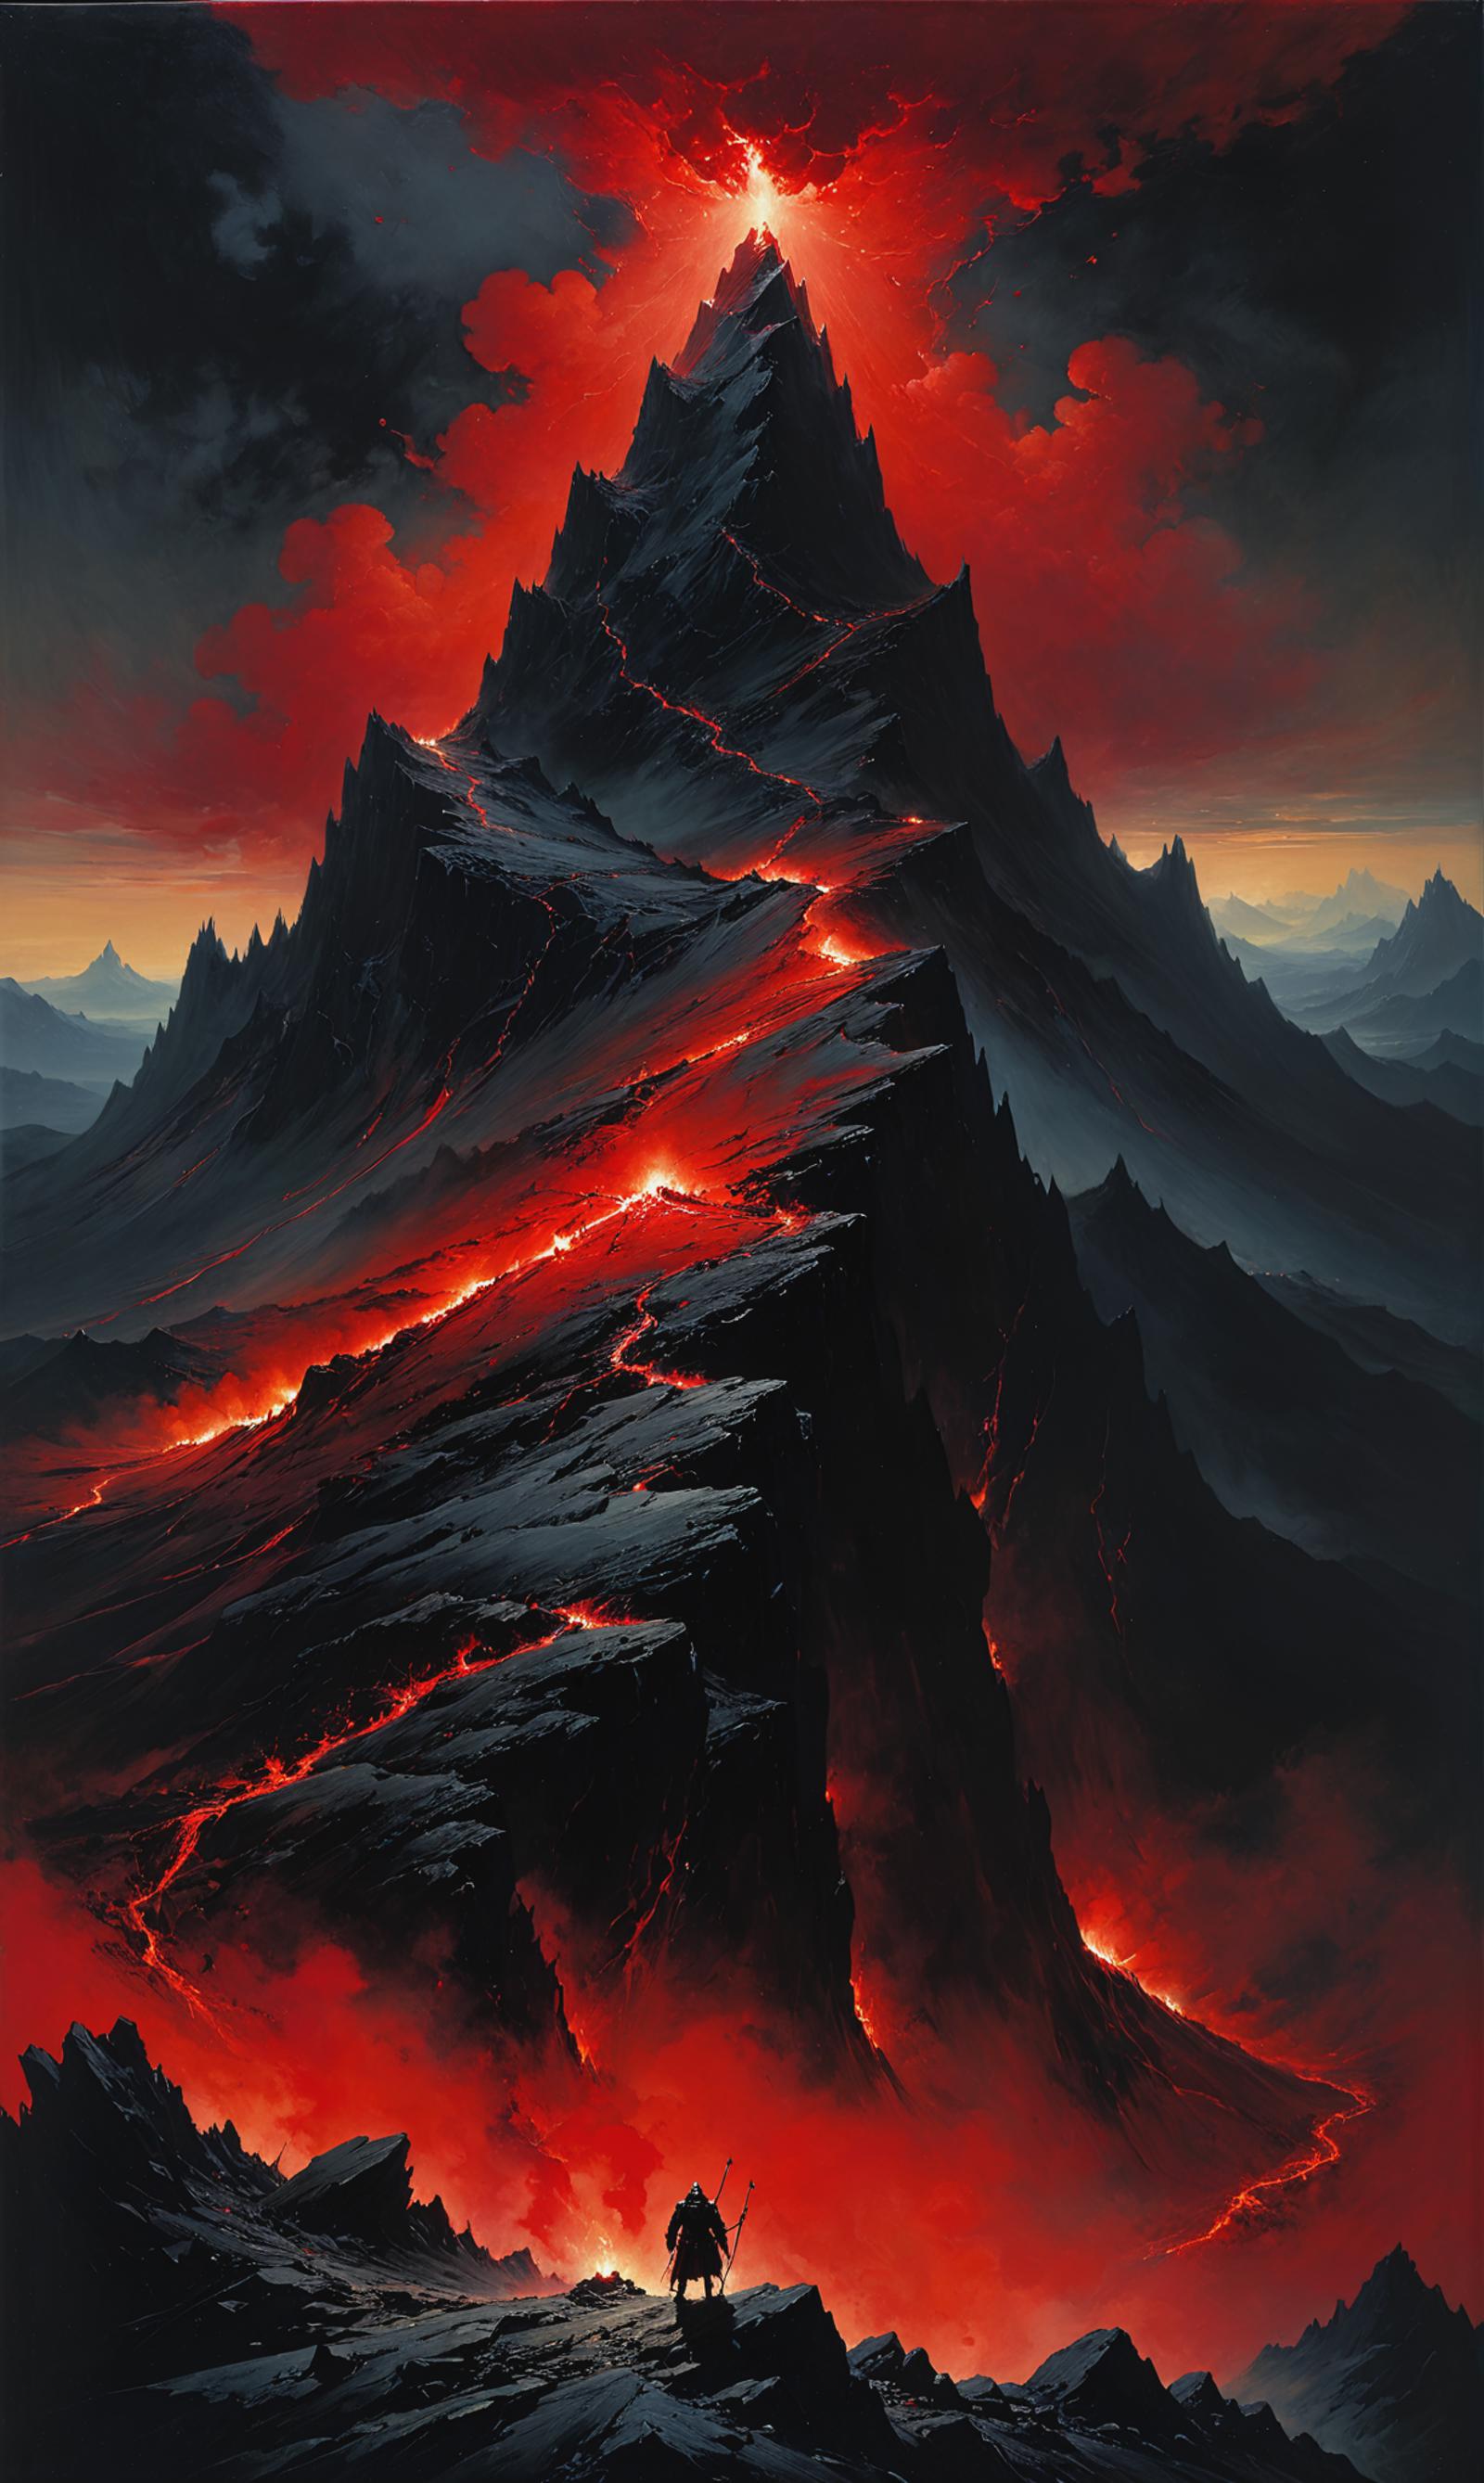 A Painting of a Mountain Range with Red Lava and Fire Trails